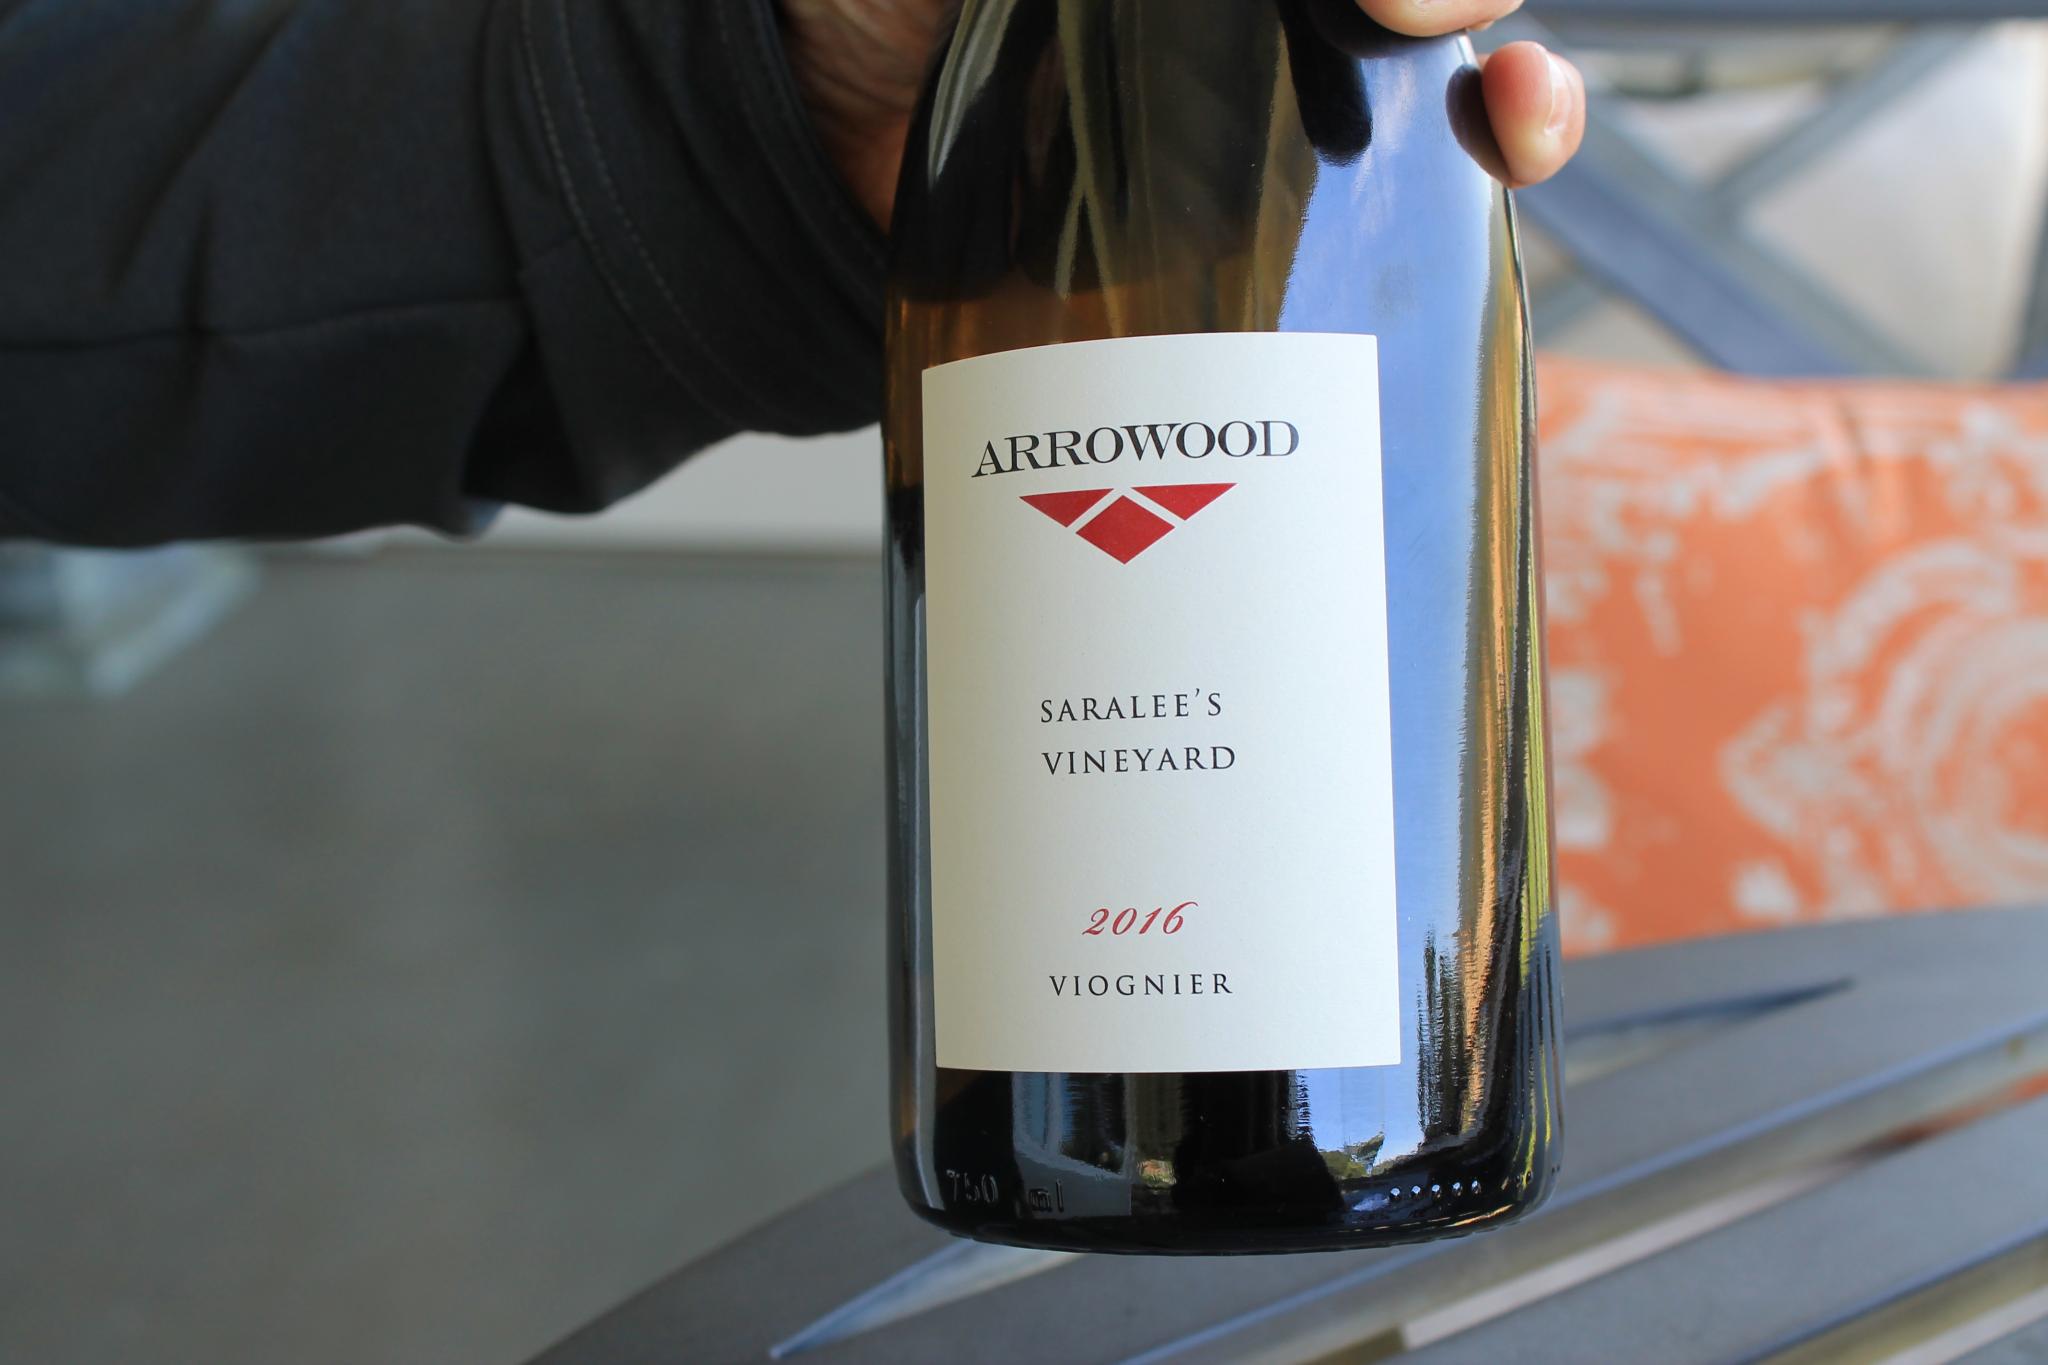 A hand holding a bottle of Arrowood 2016 Saralee's Vineyards viognier.